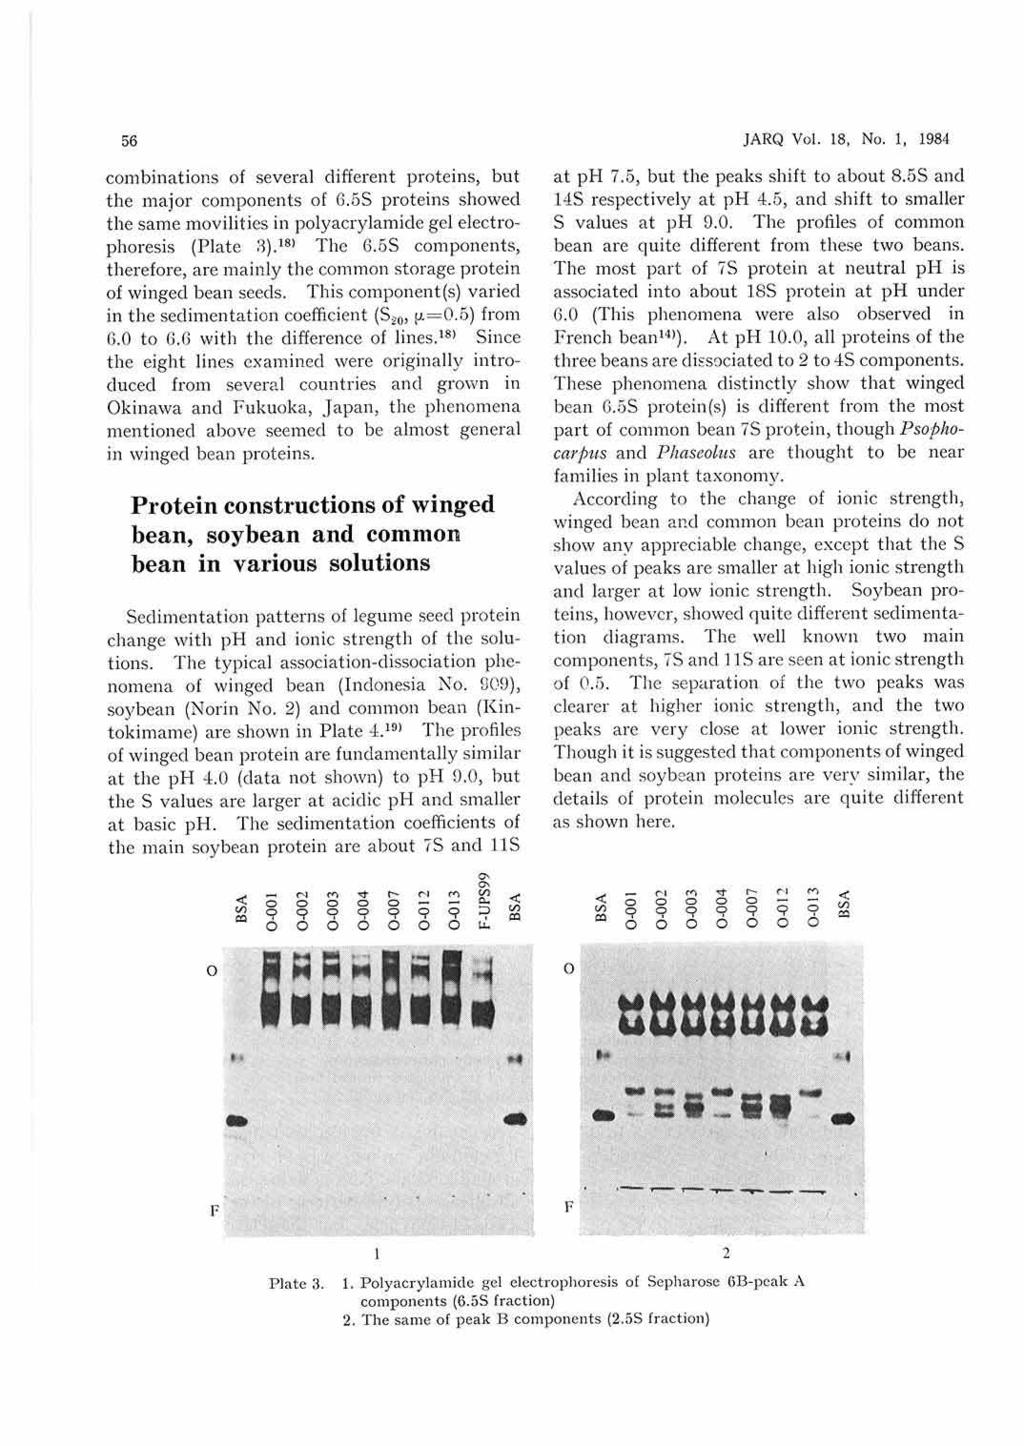 56 combinations of several different proteins, but the major components of 6.55 proteins showed the same movilities in polyacrylamicle gel electrophoresis (Plate 8}. 1 s> The 6.